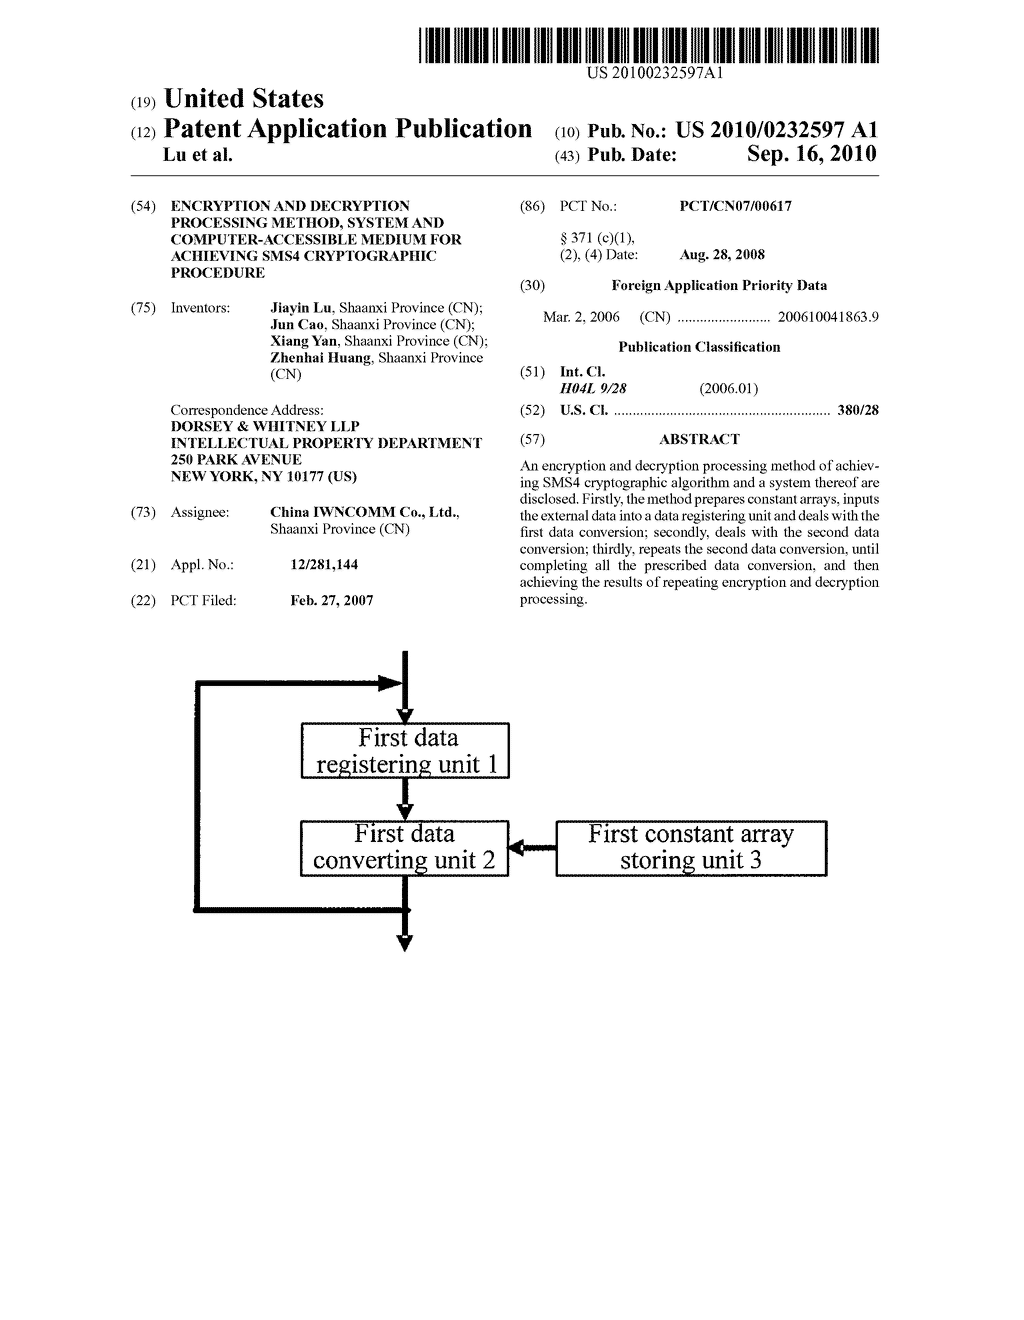 ENCRYPTION AND DECRYPTION PROCESSING METHOD, SYSTEM AND COMPUTER-ACCESSIBLE MEDIUM FOR ACHIEVING SMS4 CRYPTOGRAPHIC PROCEDURE - diagram, schematic, and image 01